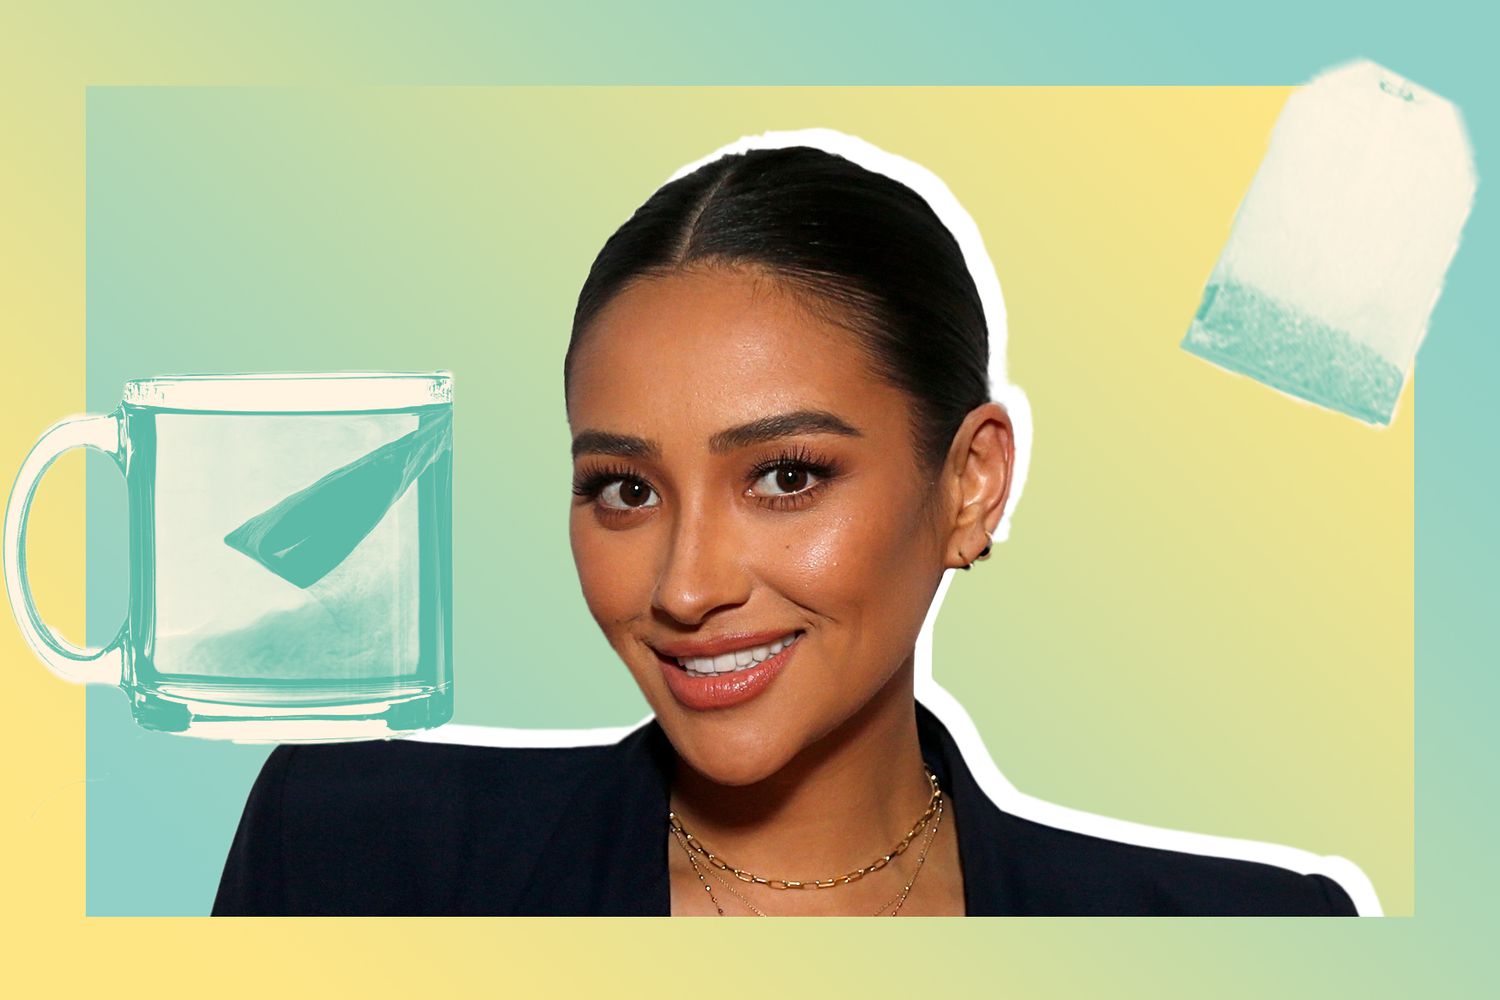 Shay Mitchell tea , NEW YORK, NEW YORK - FEBRUARY 19: (EXCLUSIVE COVERAGE) Shay Mitchell attends BuzzFeed's "AM To DM" on February 19, 2020 in New York City. (Photo by Dominik Bindl/Getty Images)